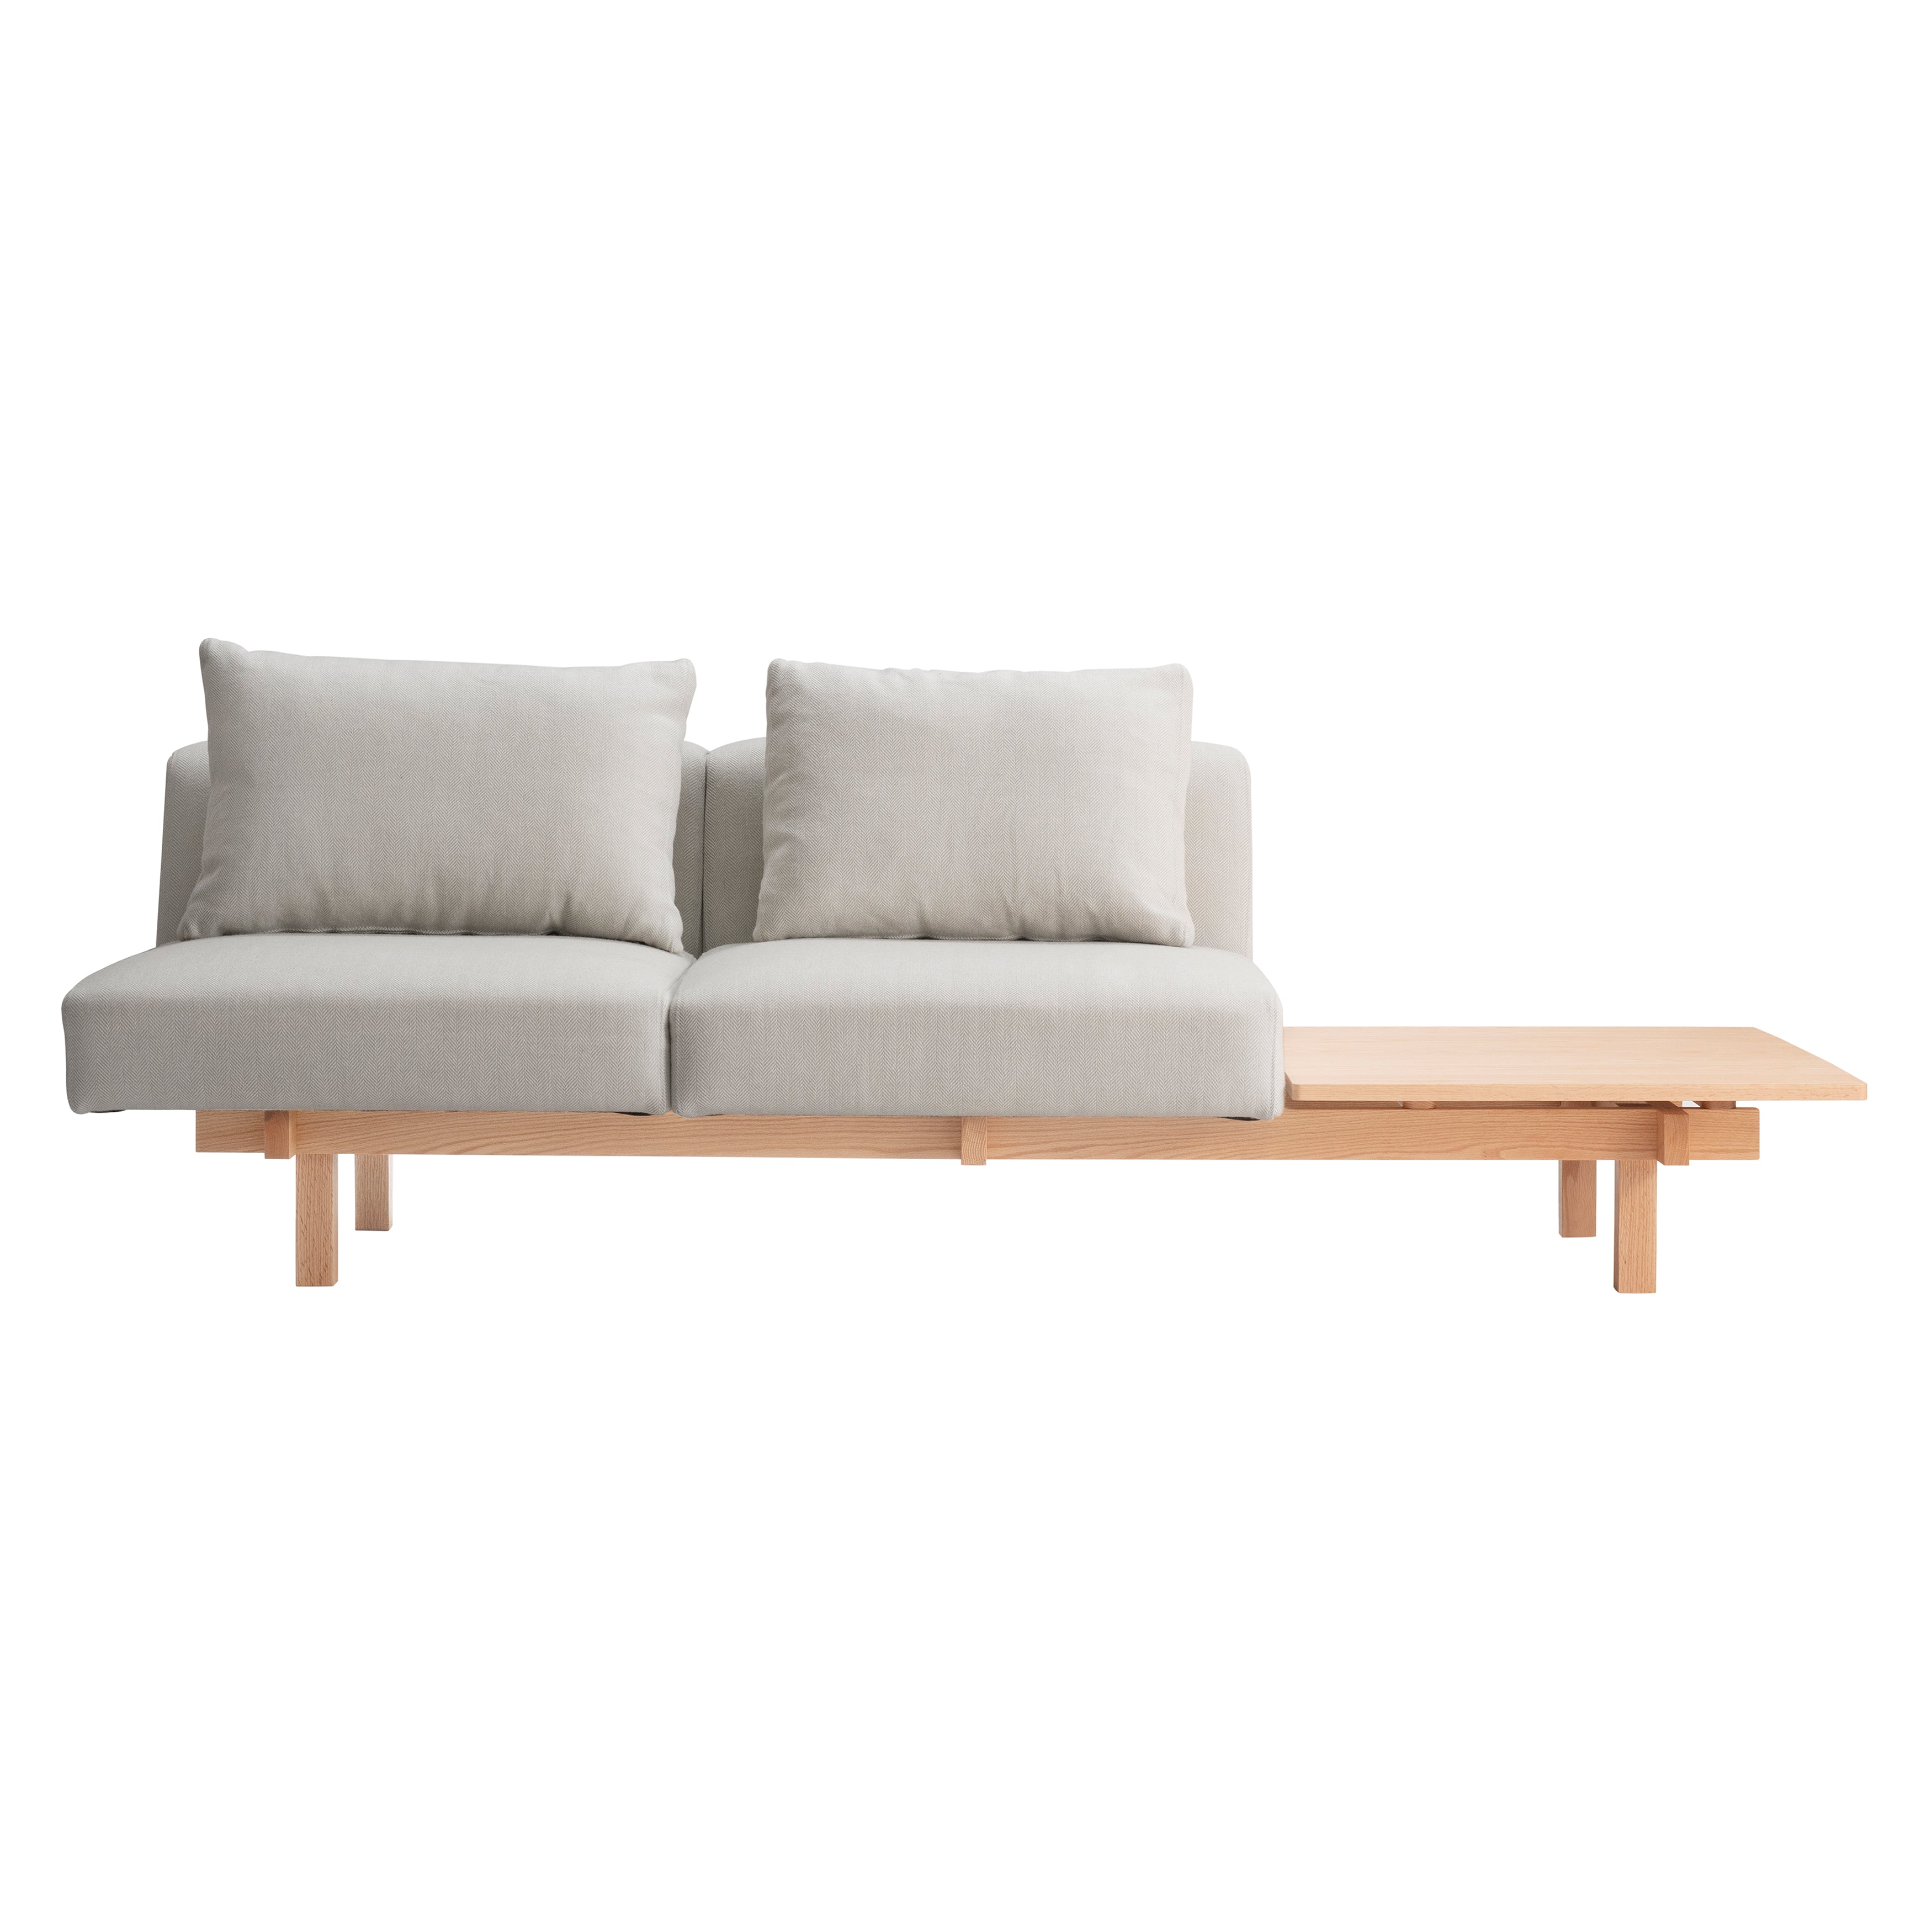 Raft Sofa 2 Seater with Table: Natural Oak + Fiord2 121